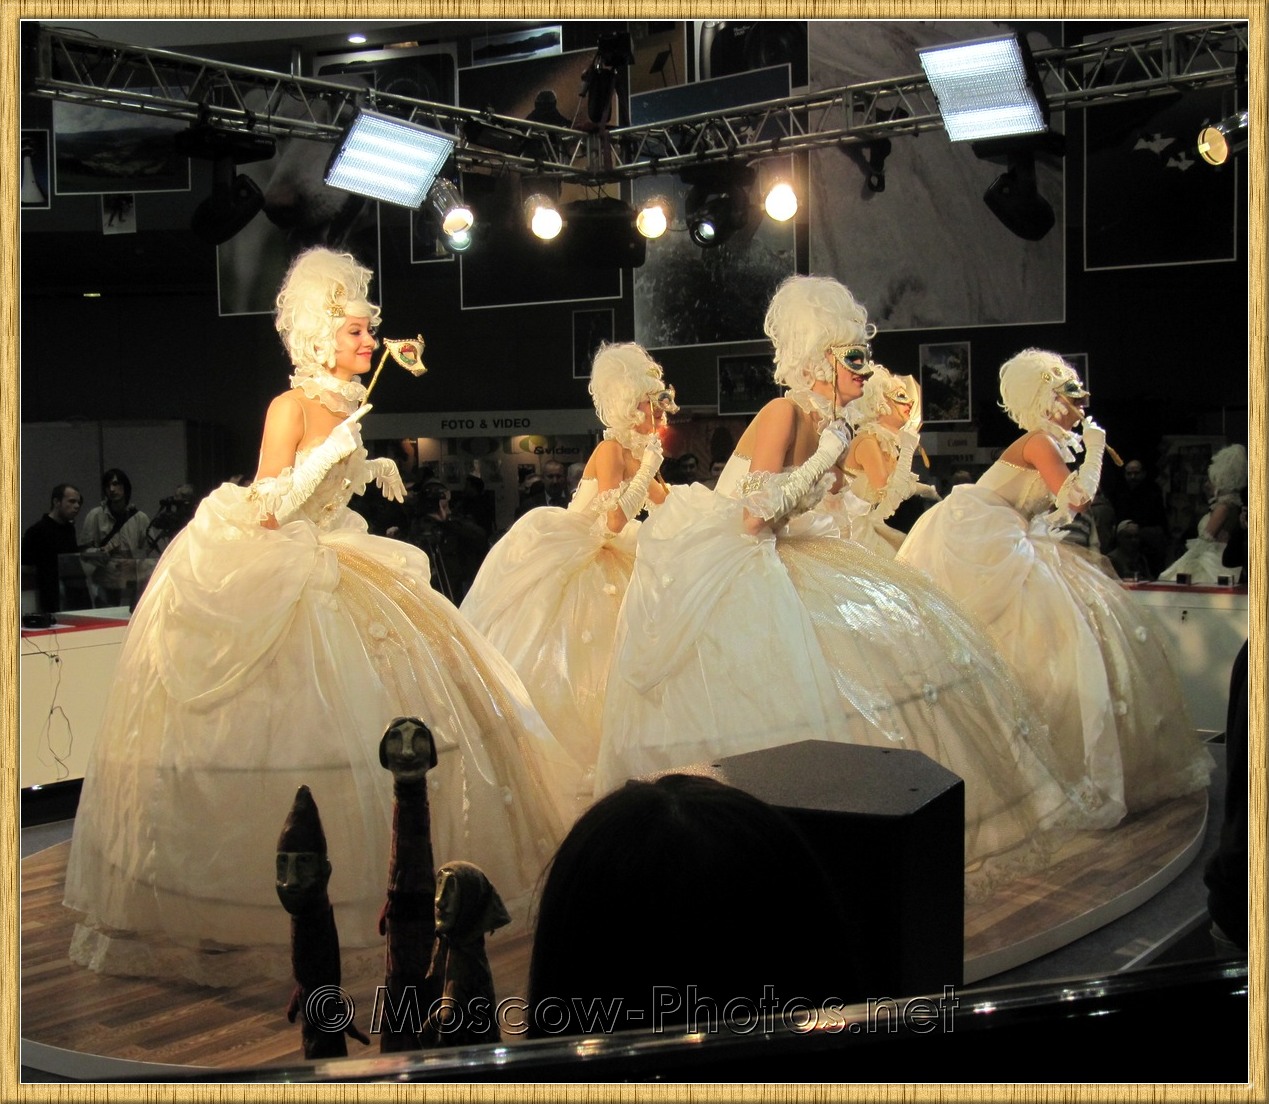 Dancing girls in white ball gowns at Photoforum 2010